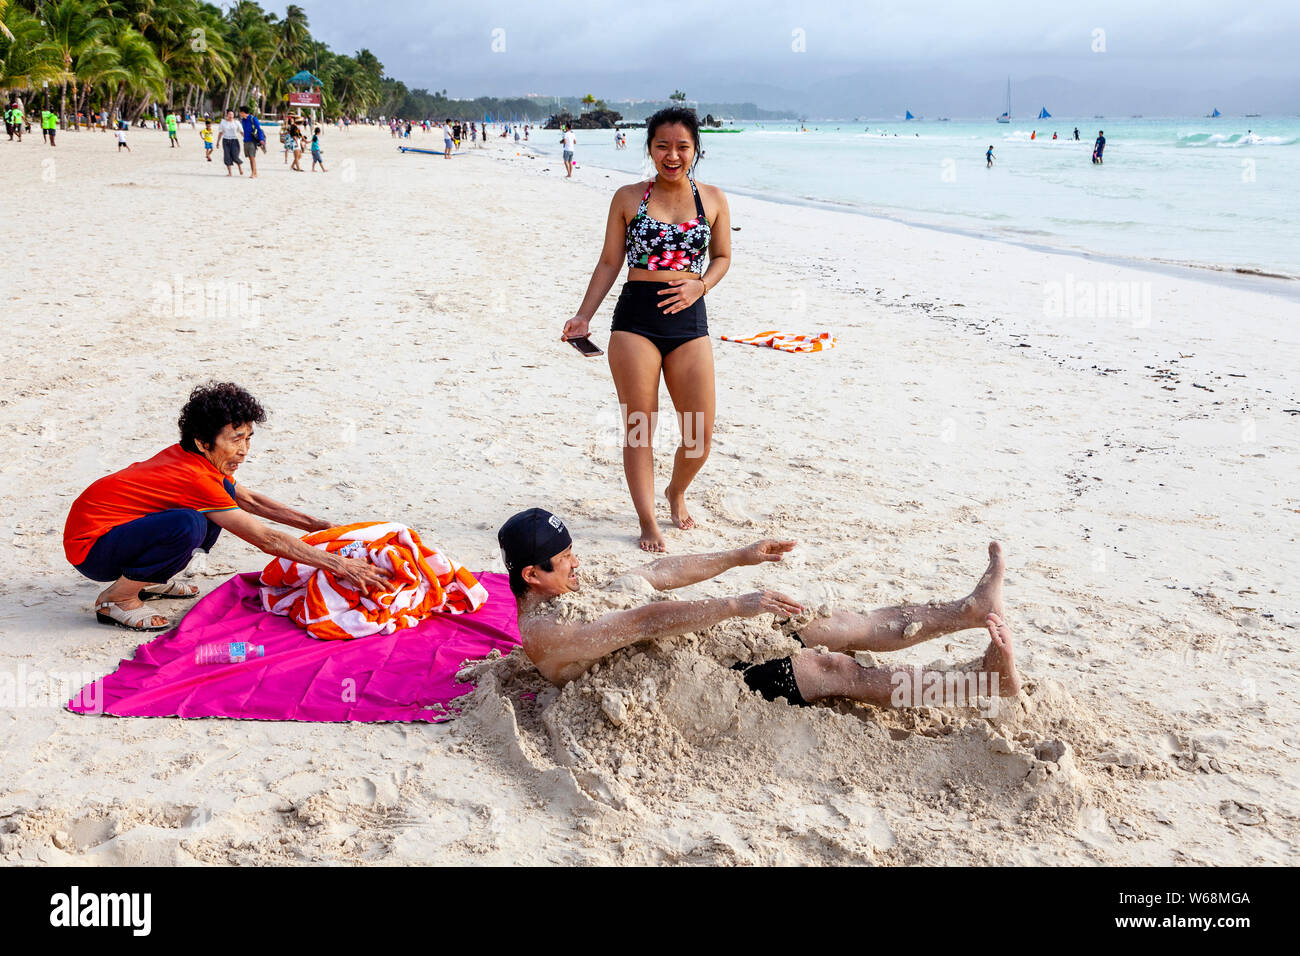 Tourists Being Covered In Sand, White Beach, Boracay, Aklan Province, The Philippines. Stock Photo